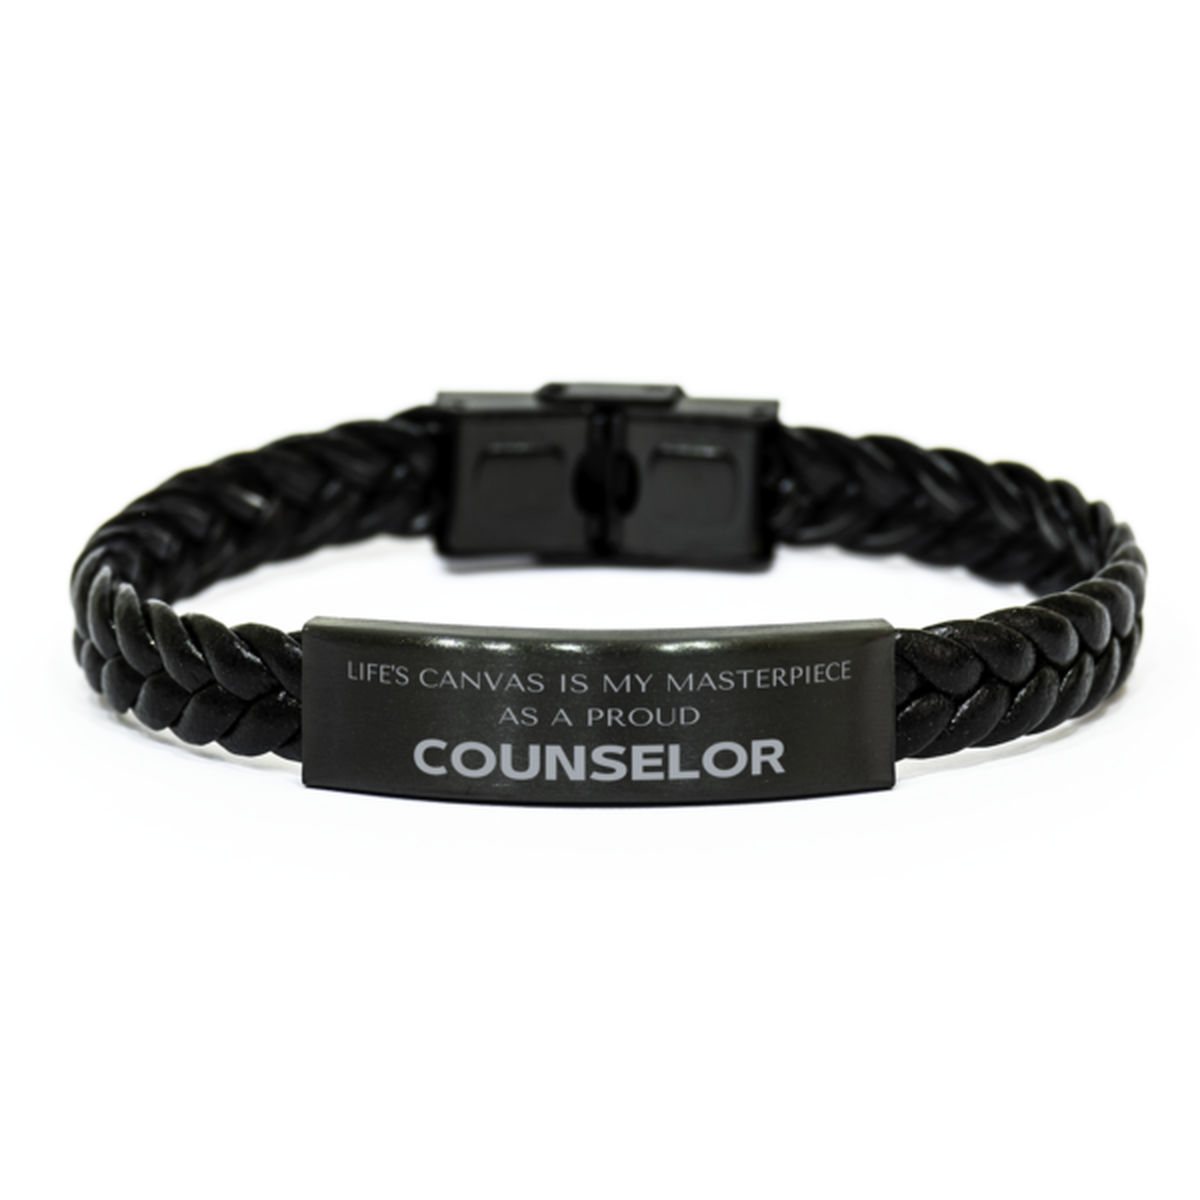 Proud Counselor Gifts, Life's canvas is my masterpiece, Epic Birthday Christmas Unique Braided Leather Bracelet For Counselor, Coworkers, Men, Women, Friends